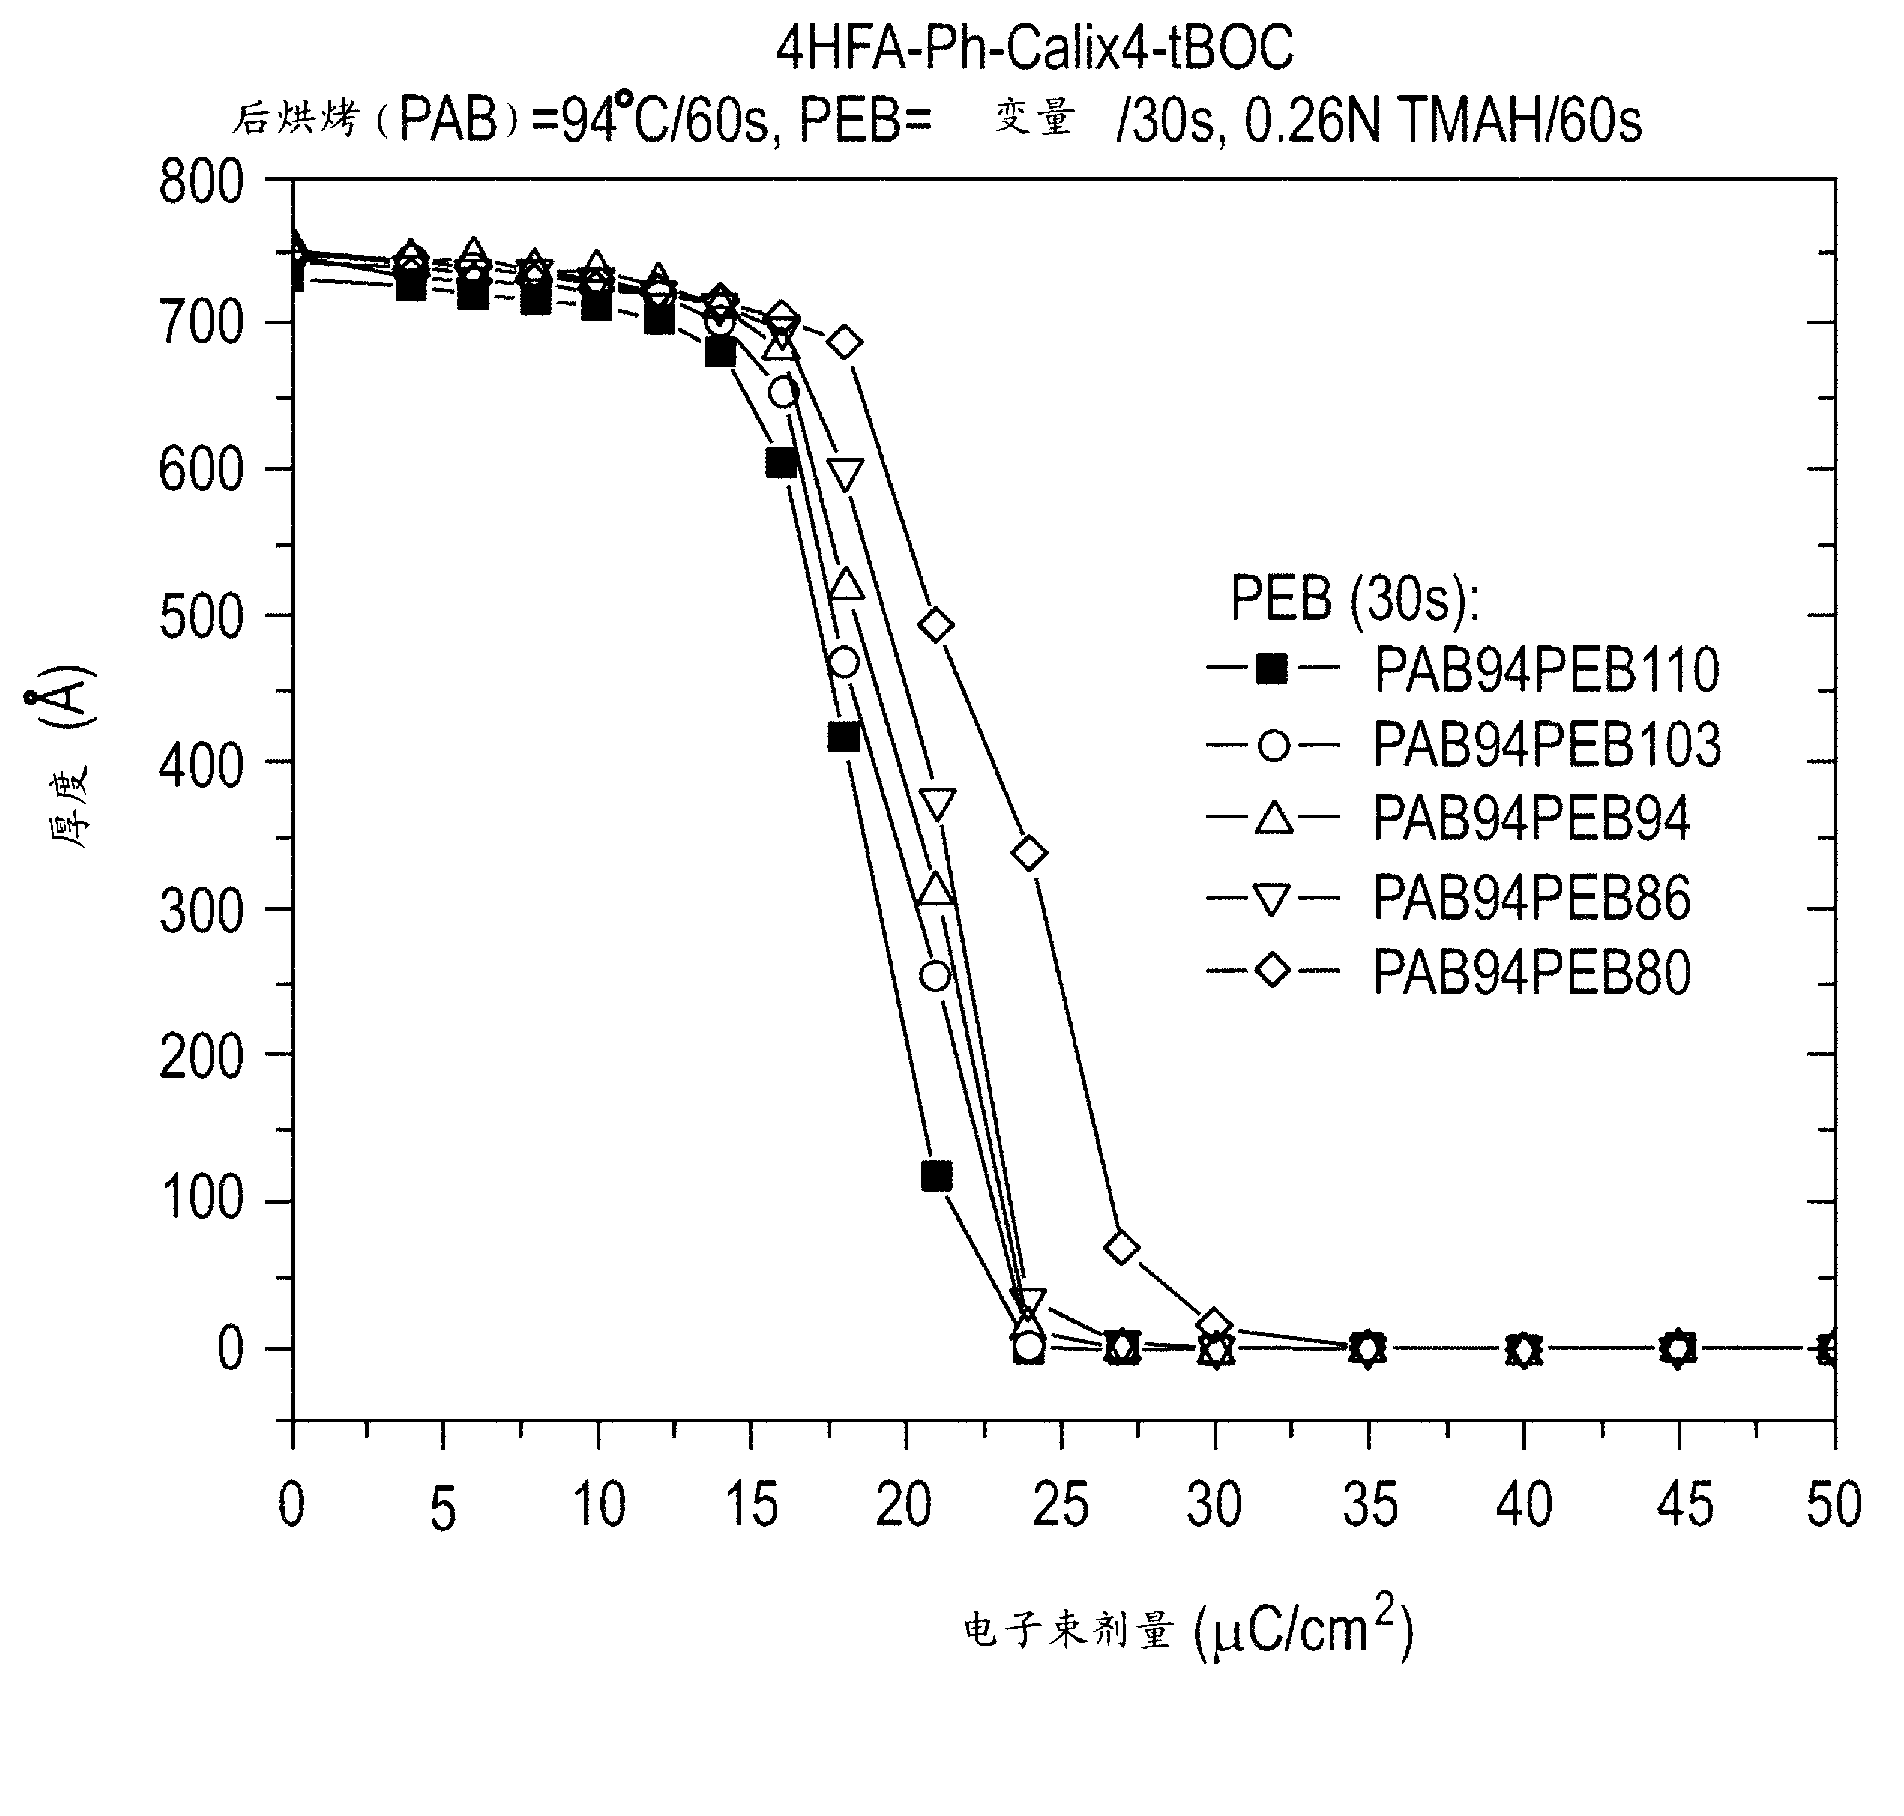 Fluoroalcohol containing molecular photoresist materials and processes of use